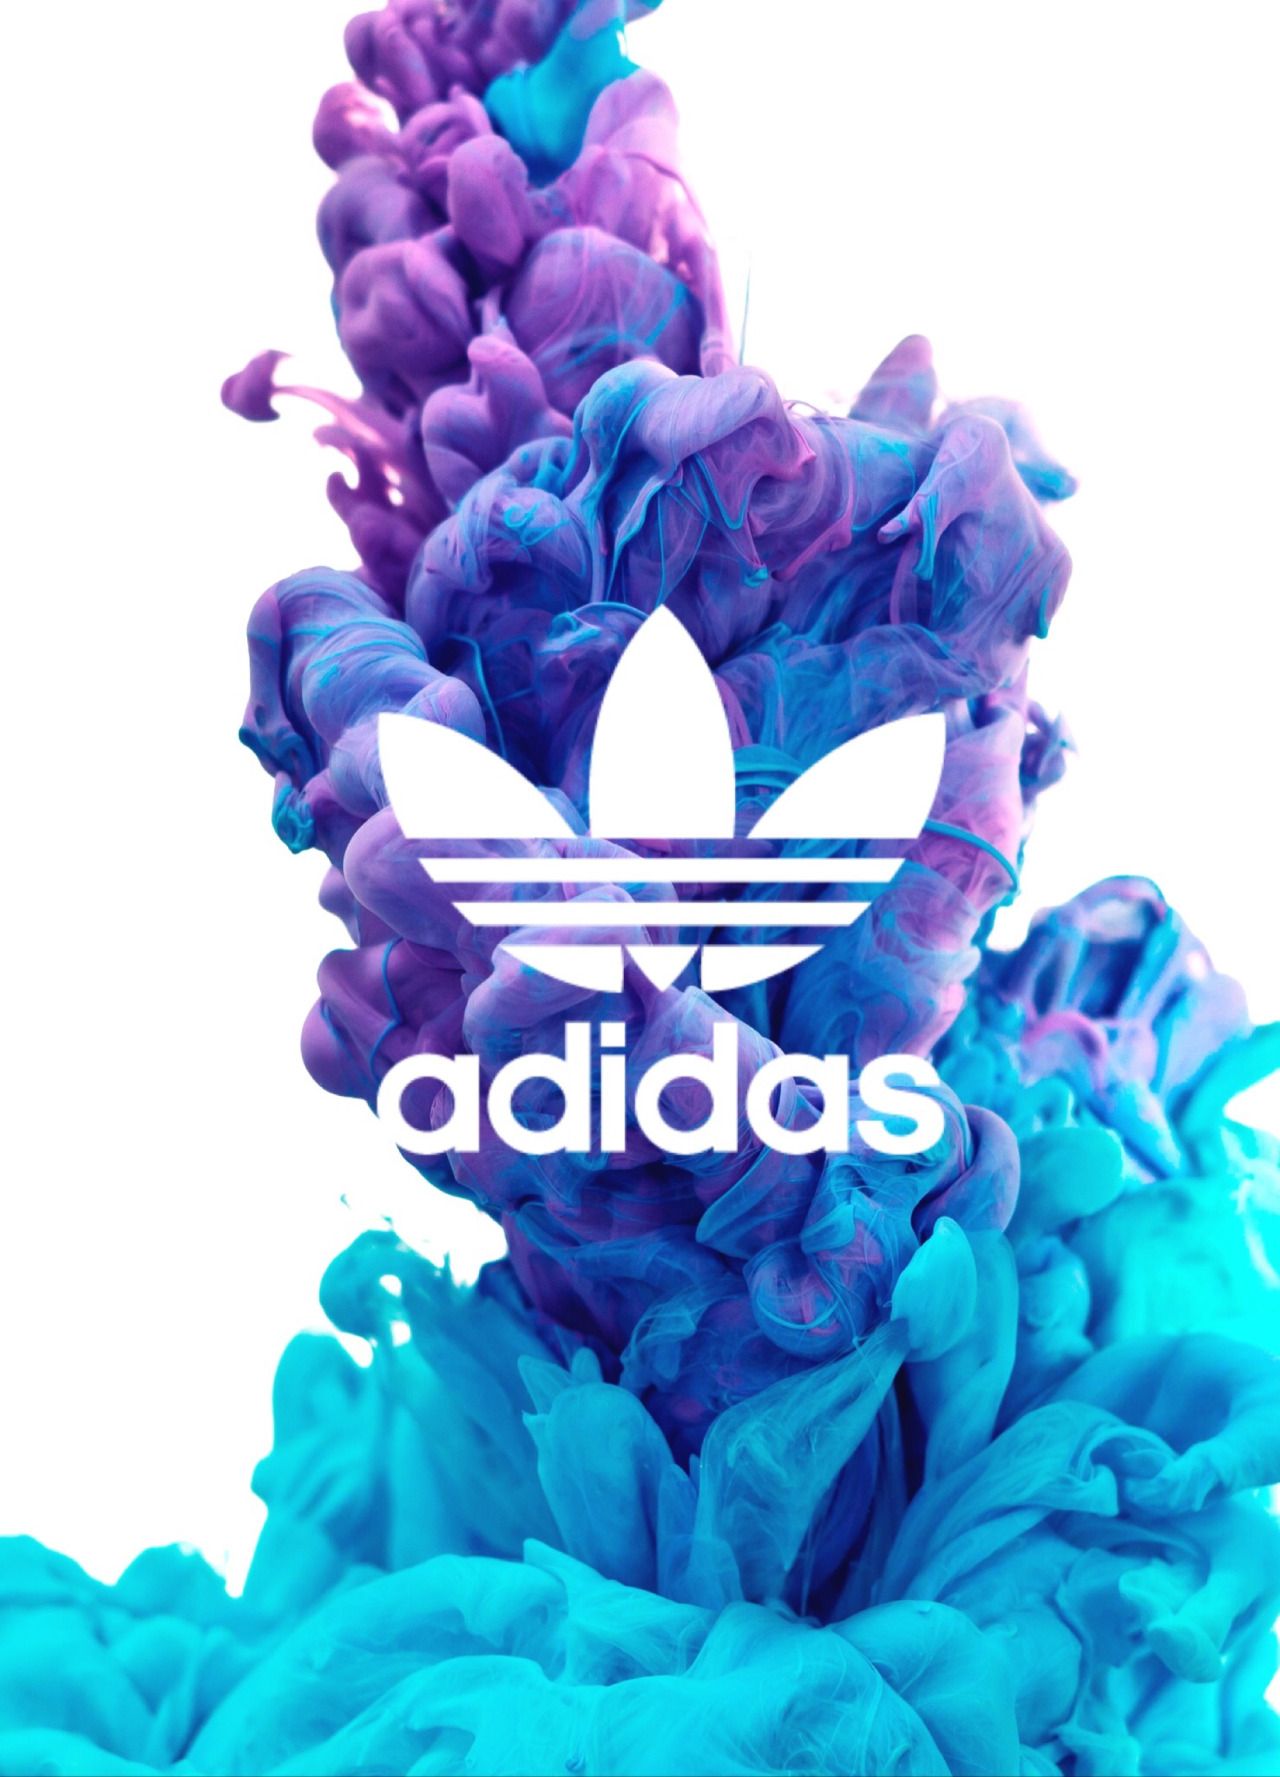 This Is So Cool Adidas iPhone Wallpaper Smoke